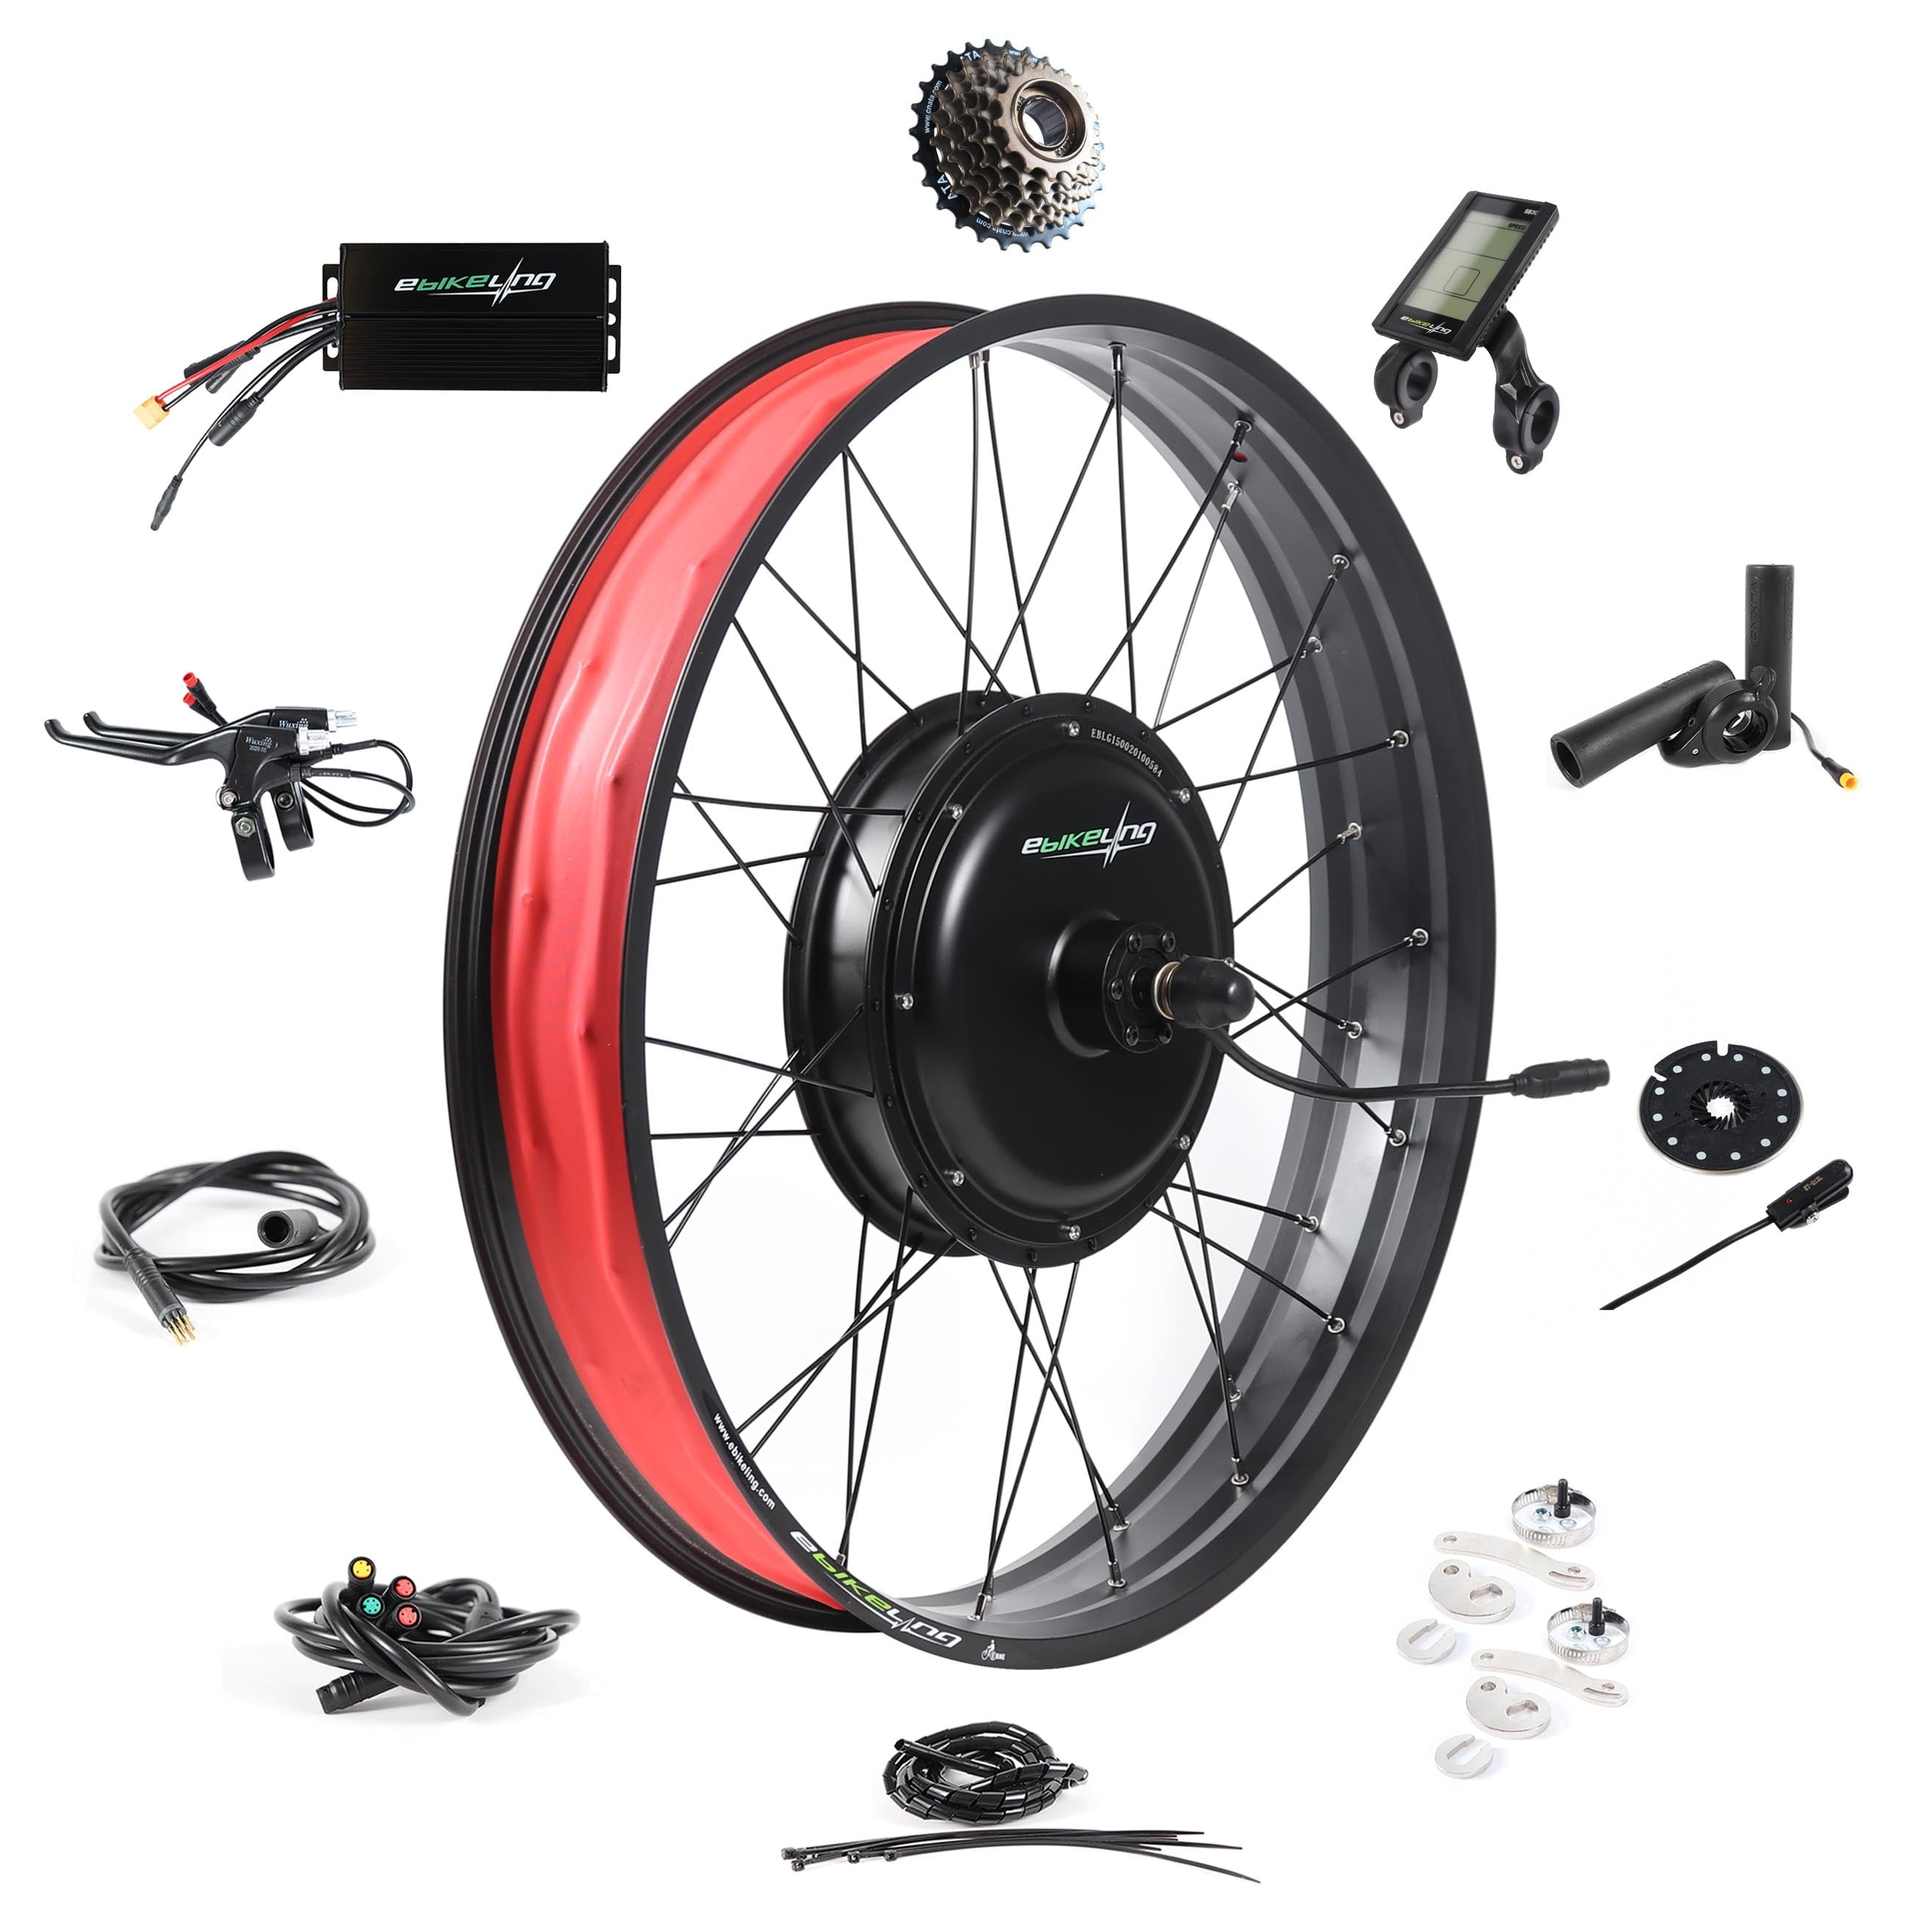 assemble Mathematical tricky Waterproof 48V 1500W Direct Drive 26" Fat Rear Motor Wheel Electric Bicycle  Ebike Conversion Kit - Walmart.com